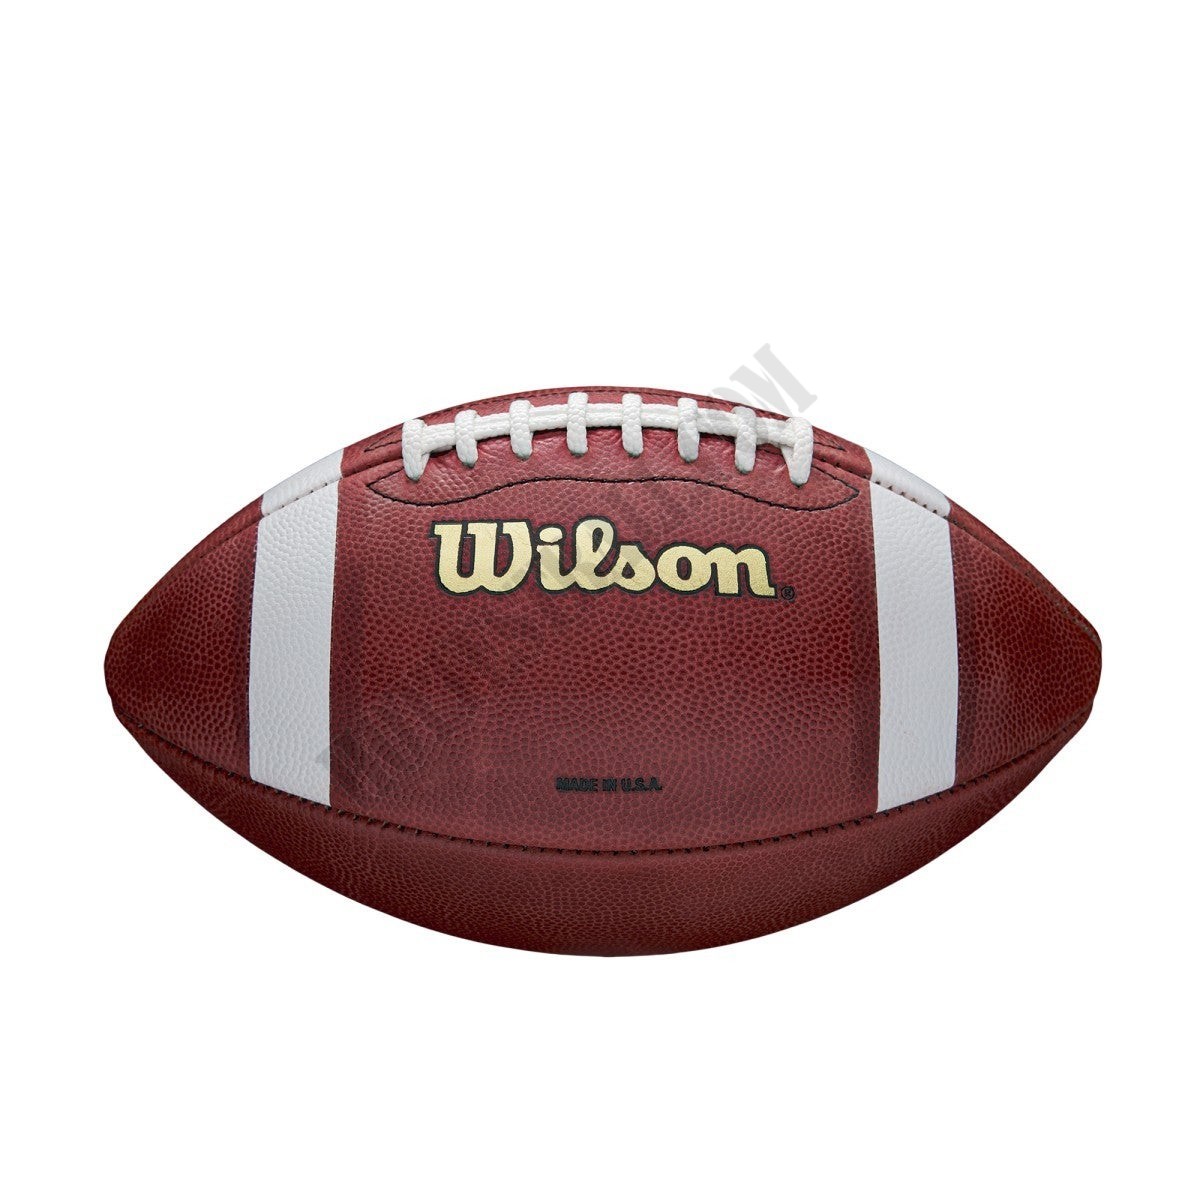 Classic Official Game Football - Wilson Discount Store - Classic Official Game Football - Wilson Discount Store